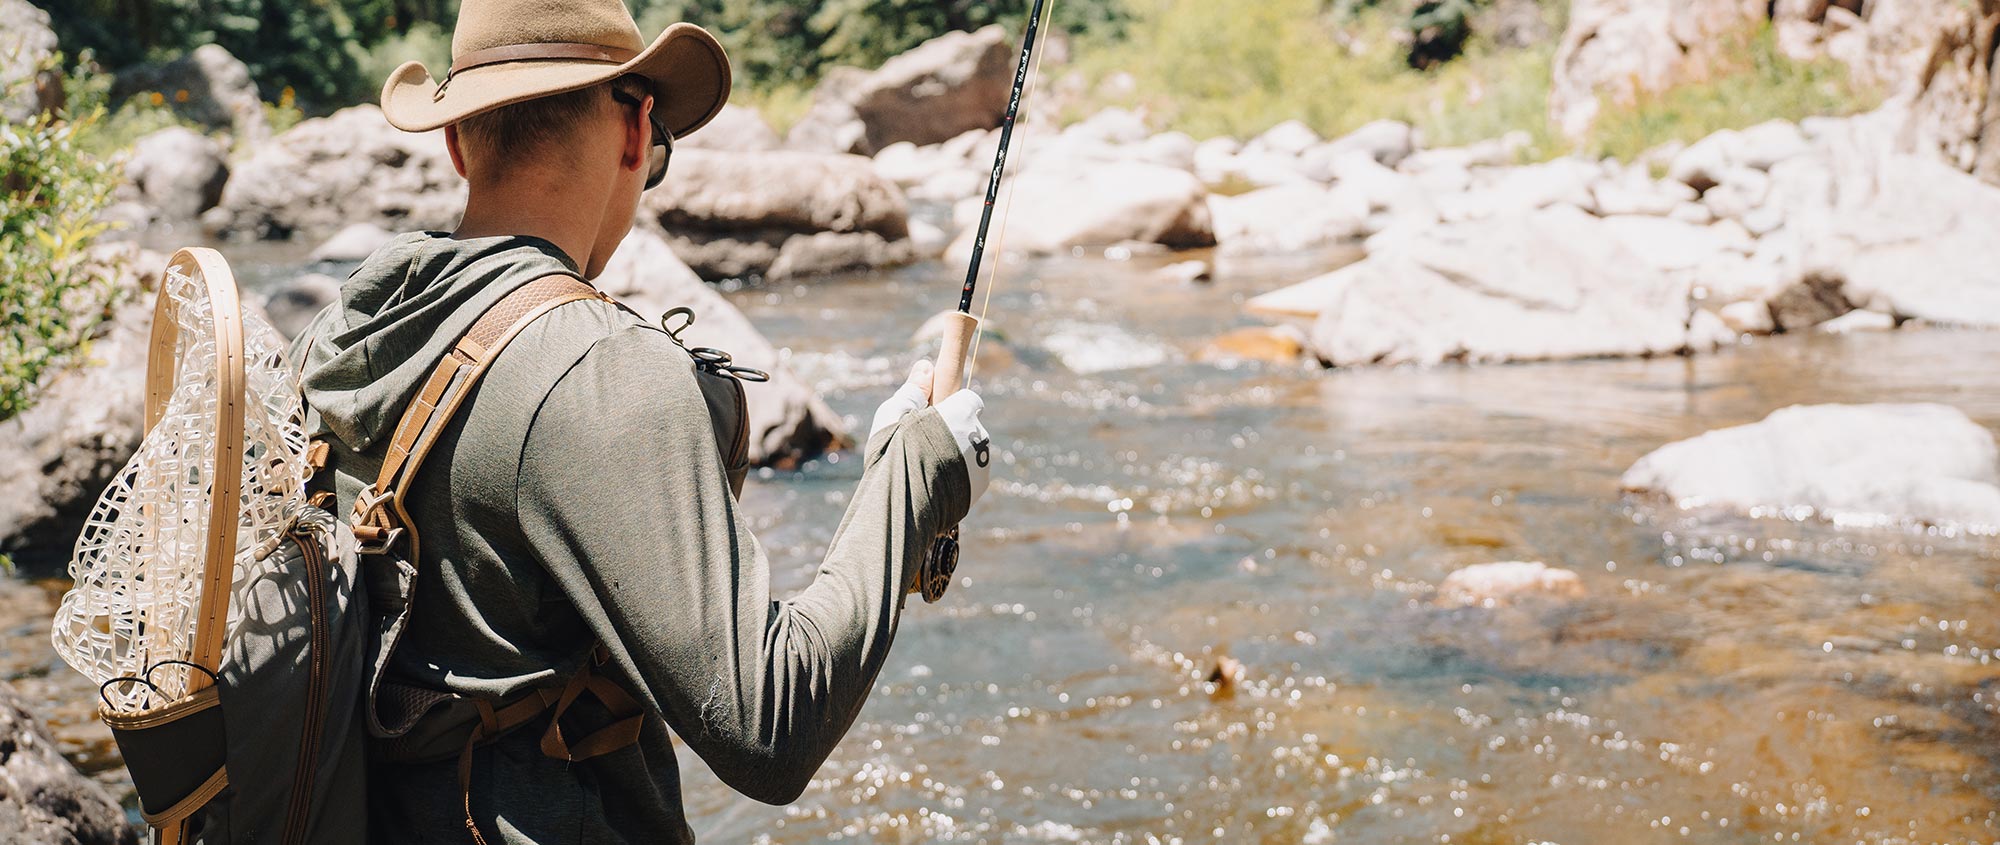 Man fly fishing stream in New Mexico.